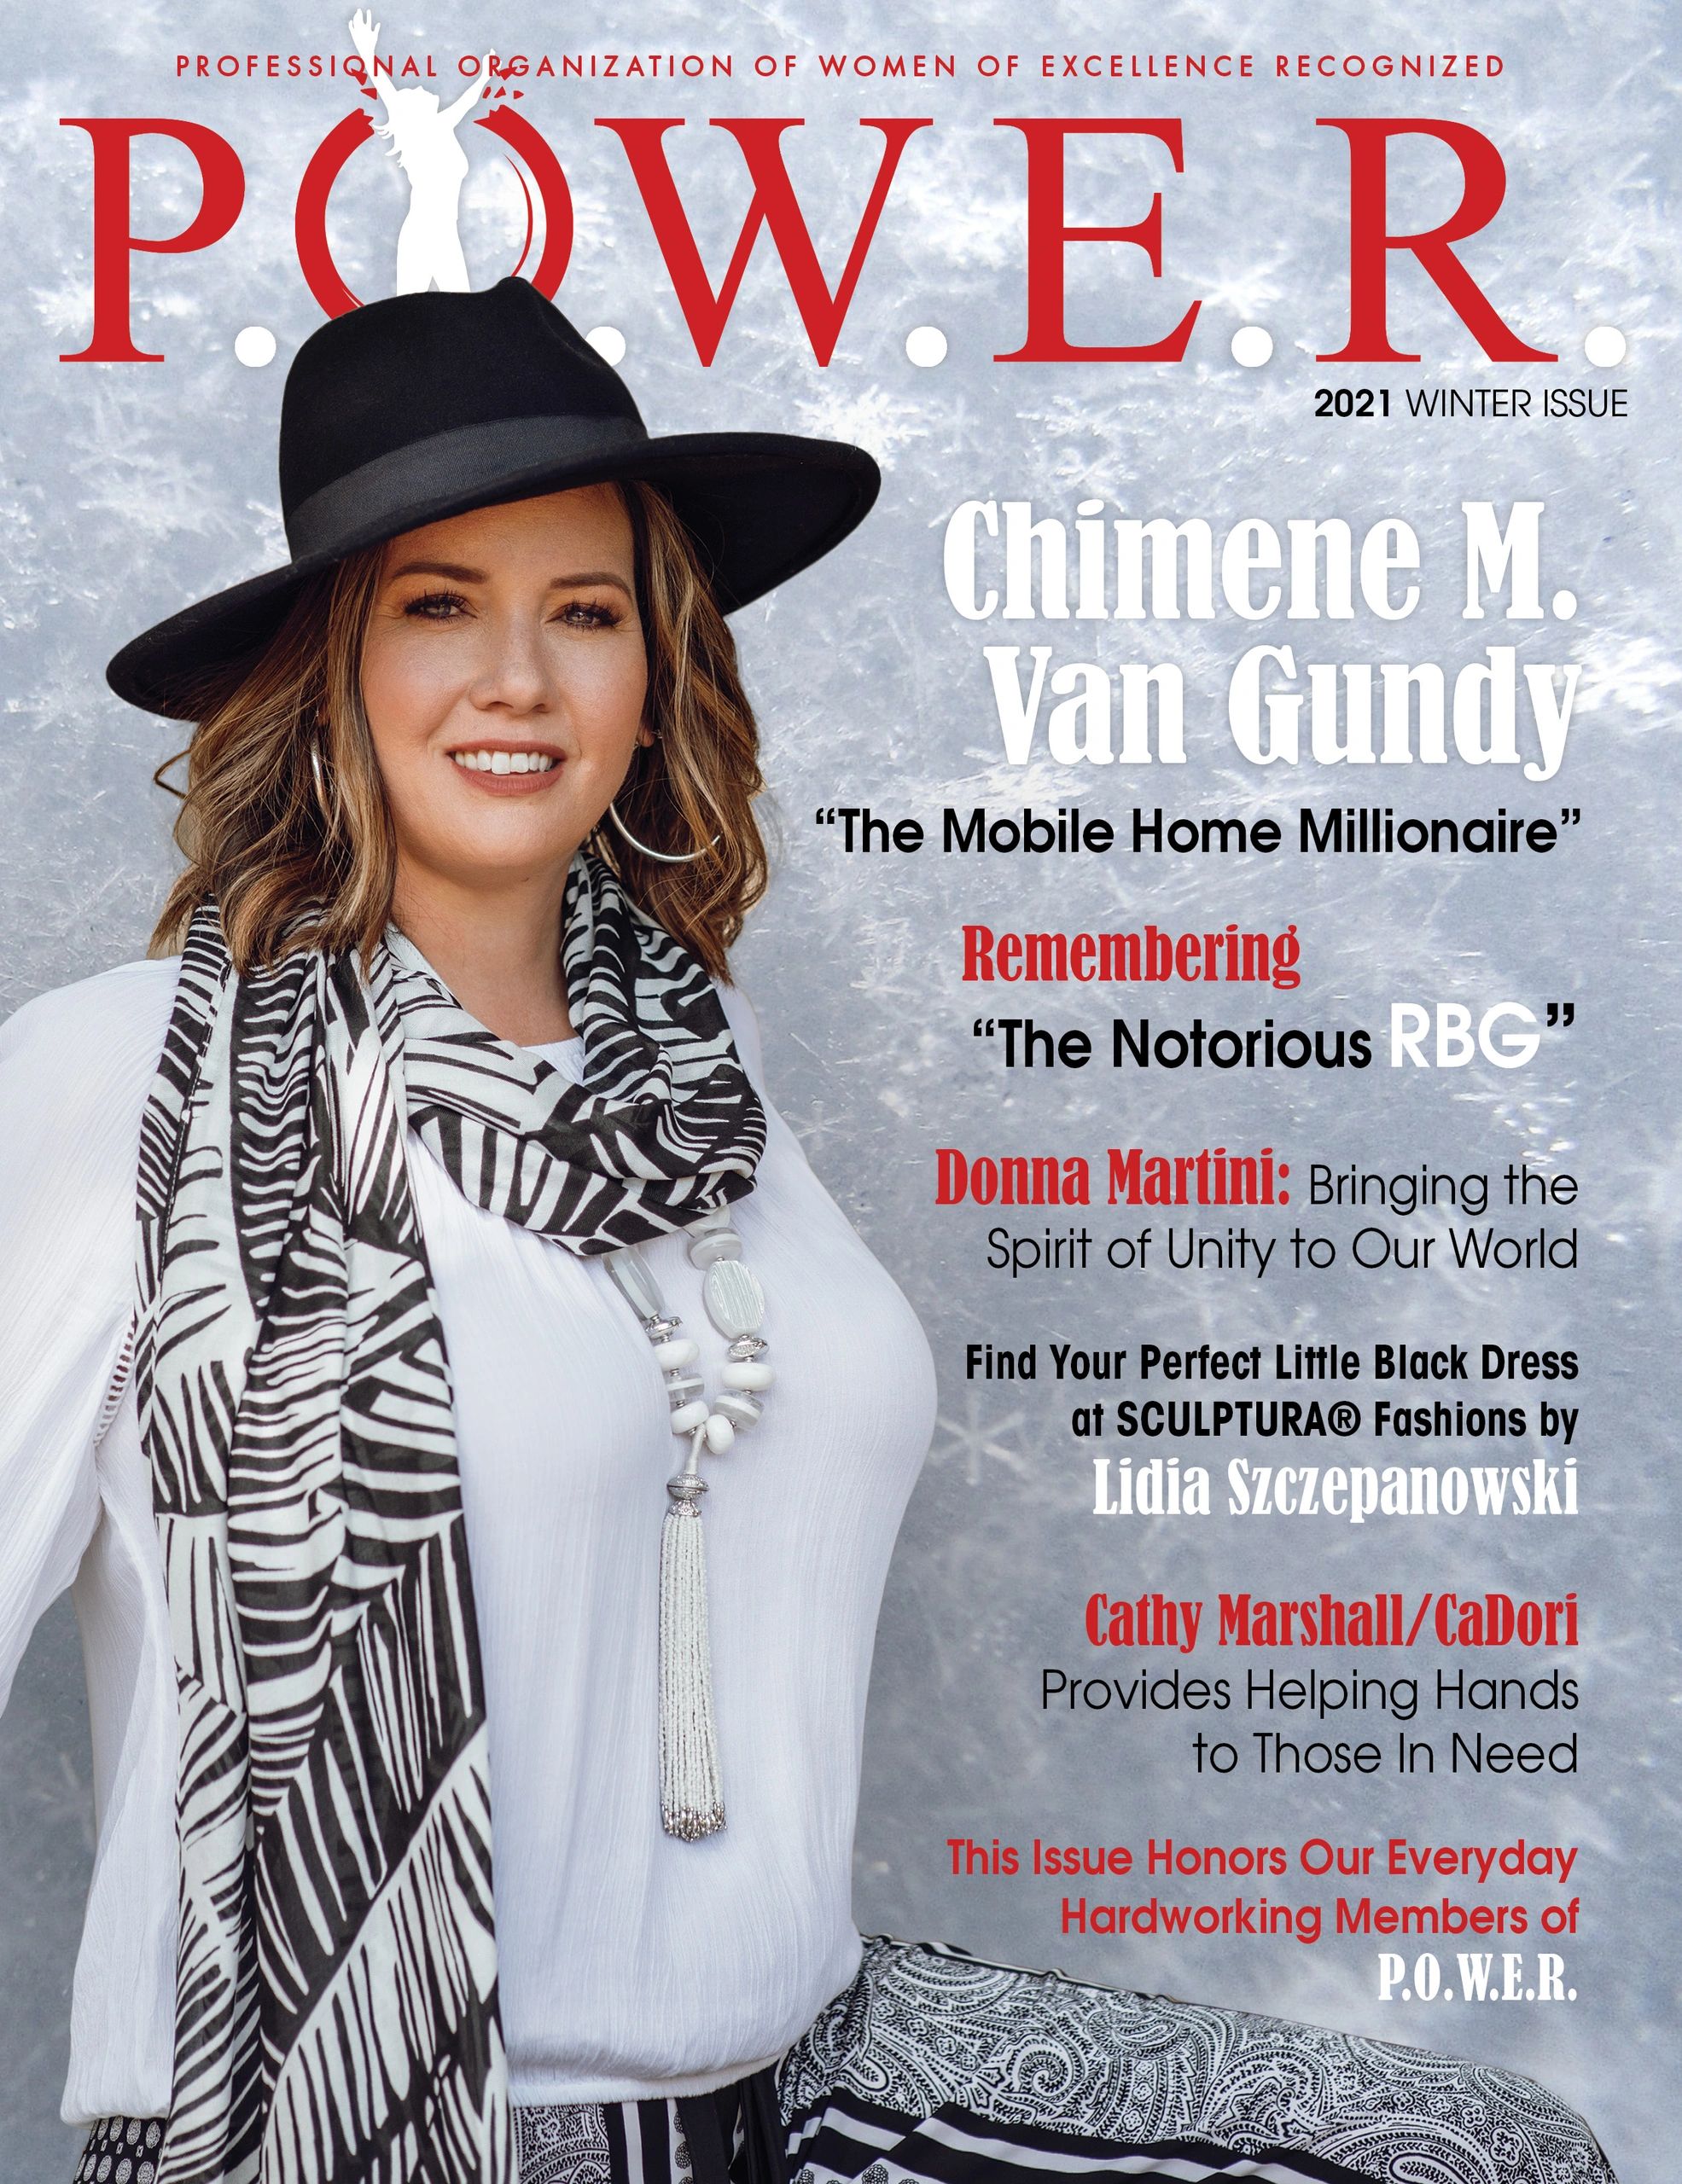 POWER Magazine: Professional Organization of Women of Excellence Recognized